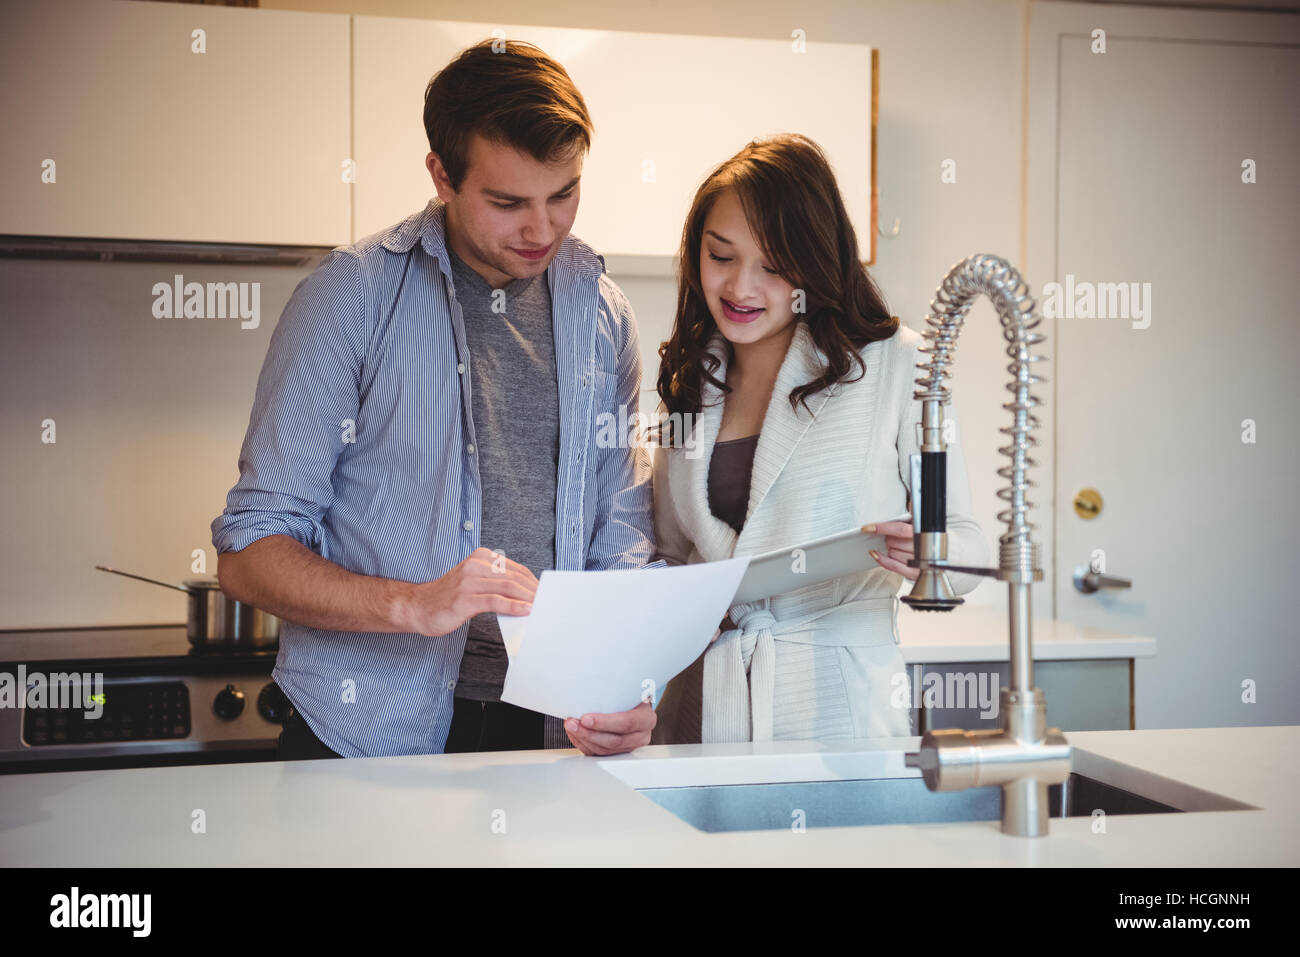 Couple discussing over digital tablet in kitchen Stock Photo